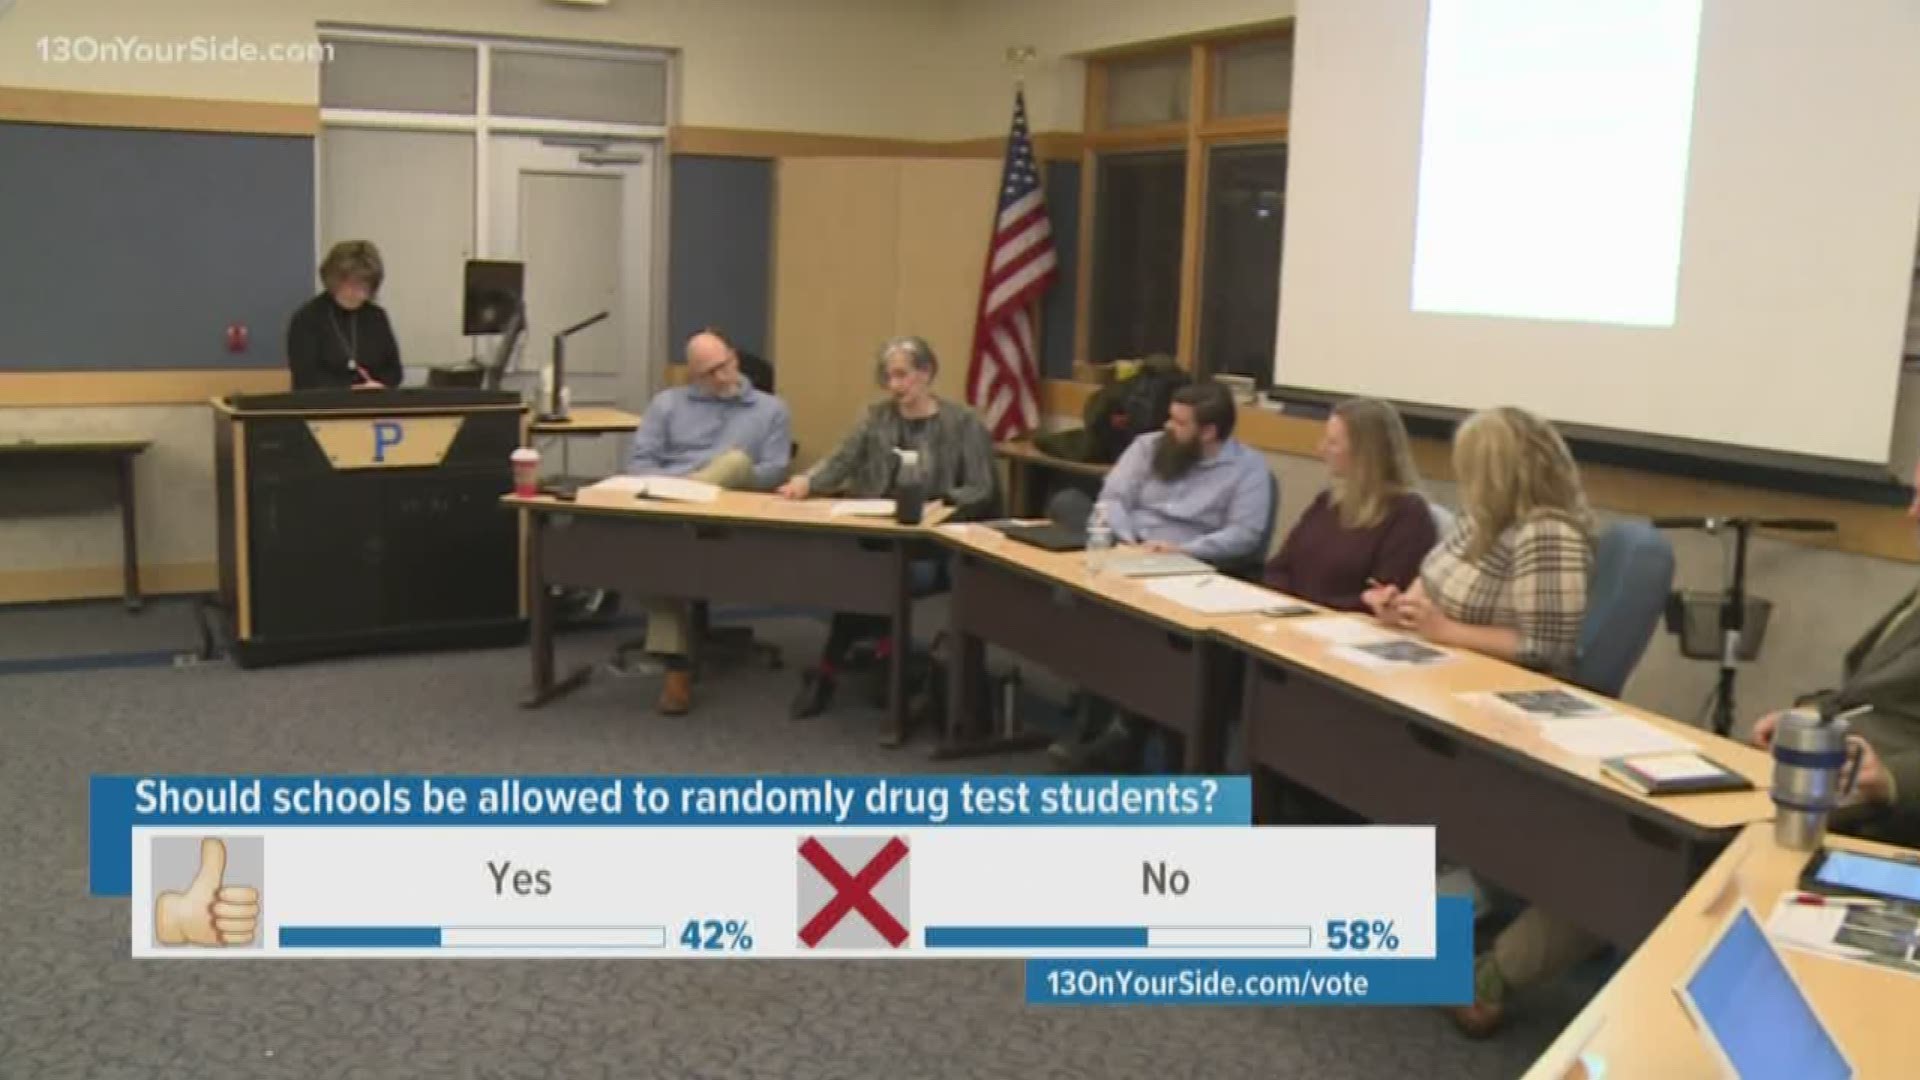 The school board voted 5-2 Tuesday approving a random drug testing policy for the high school.